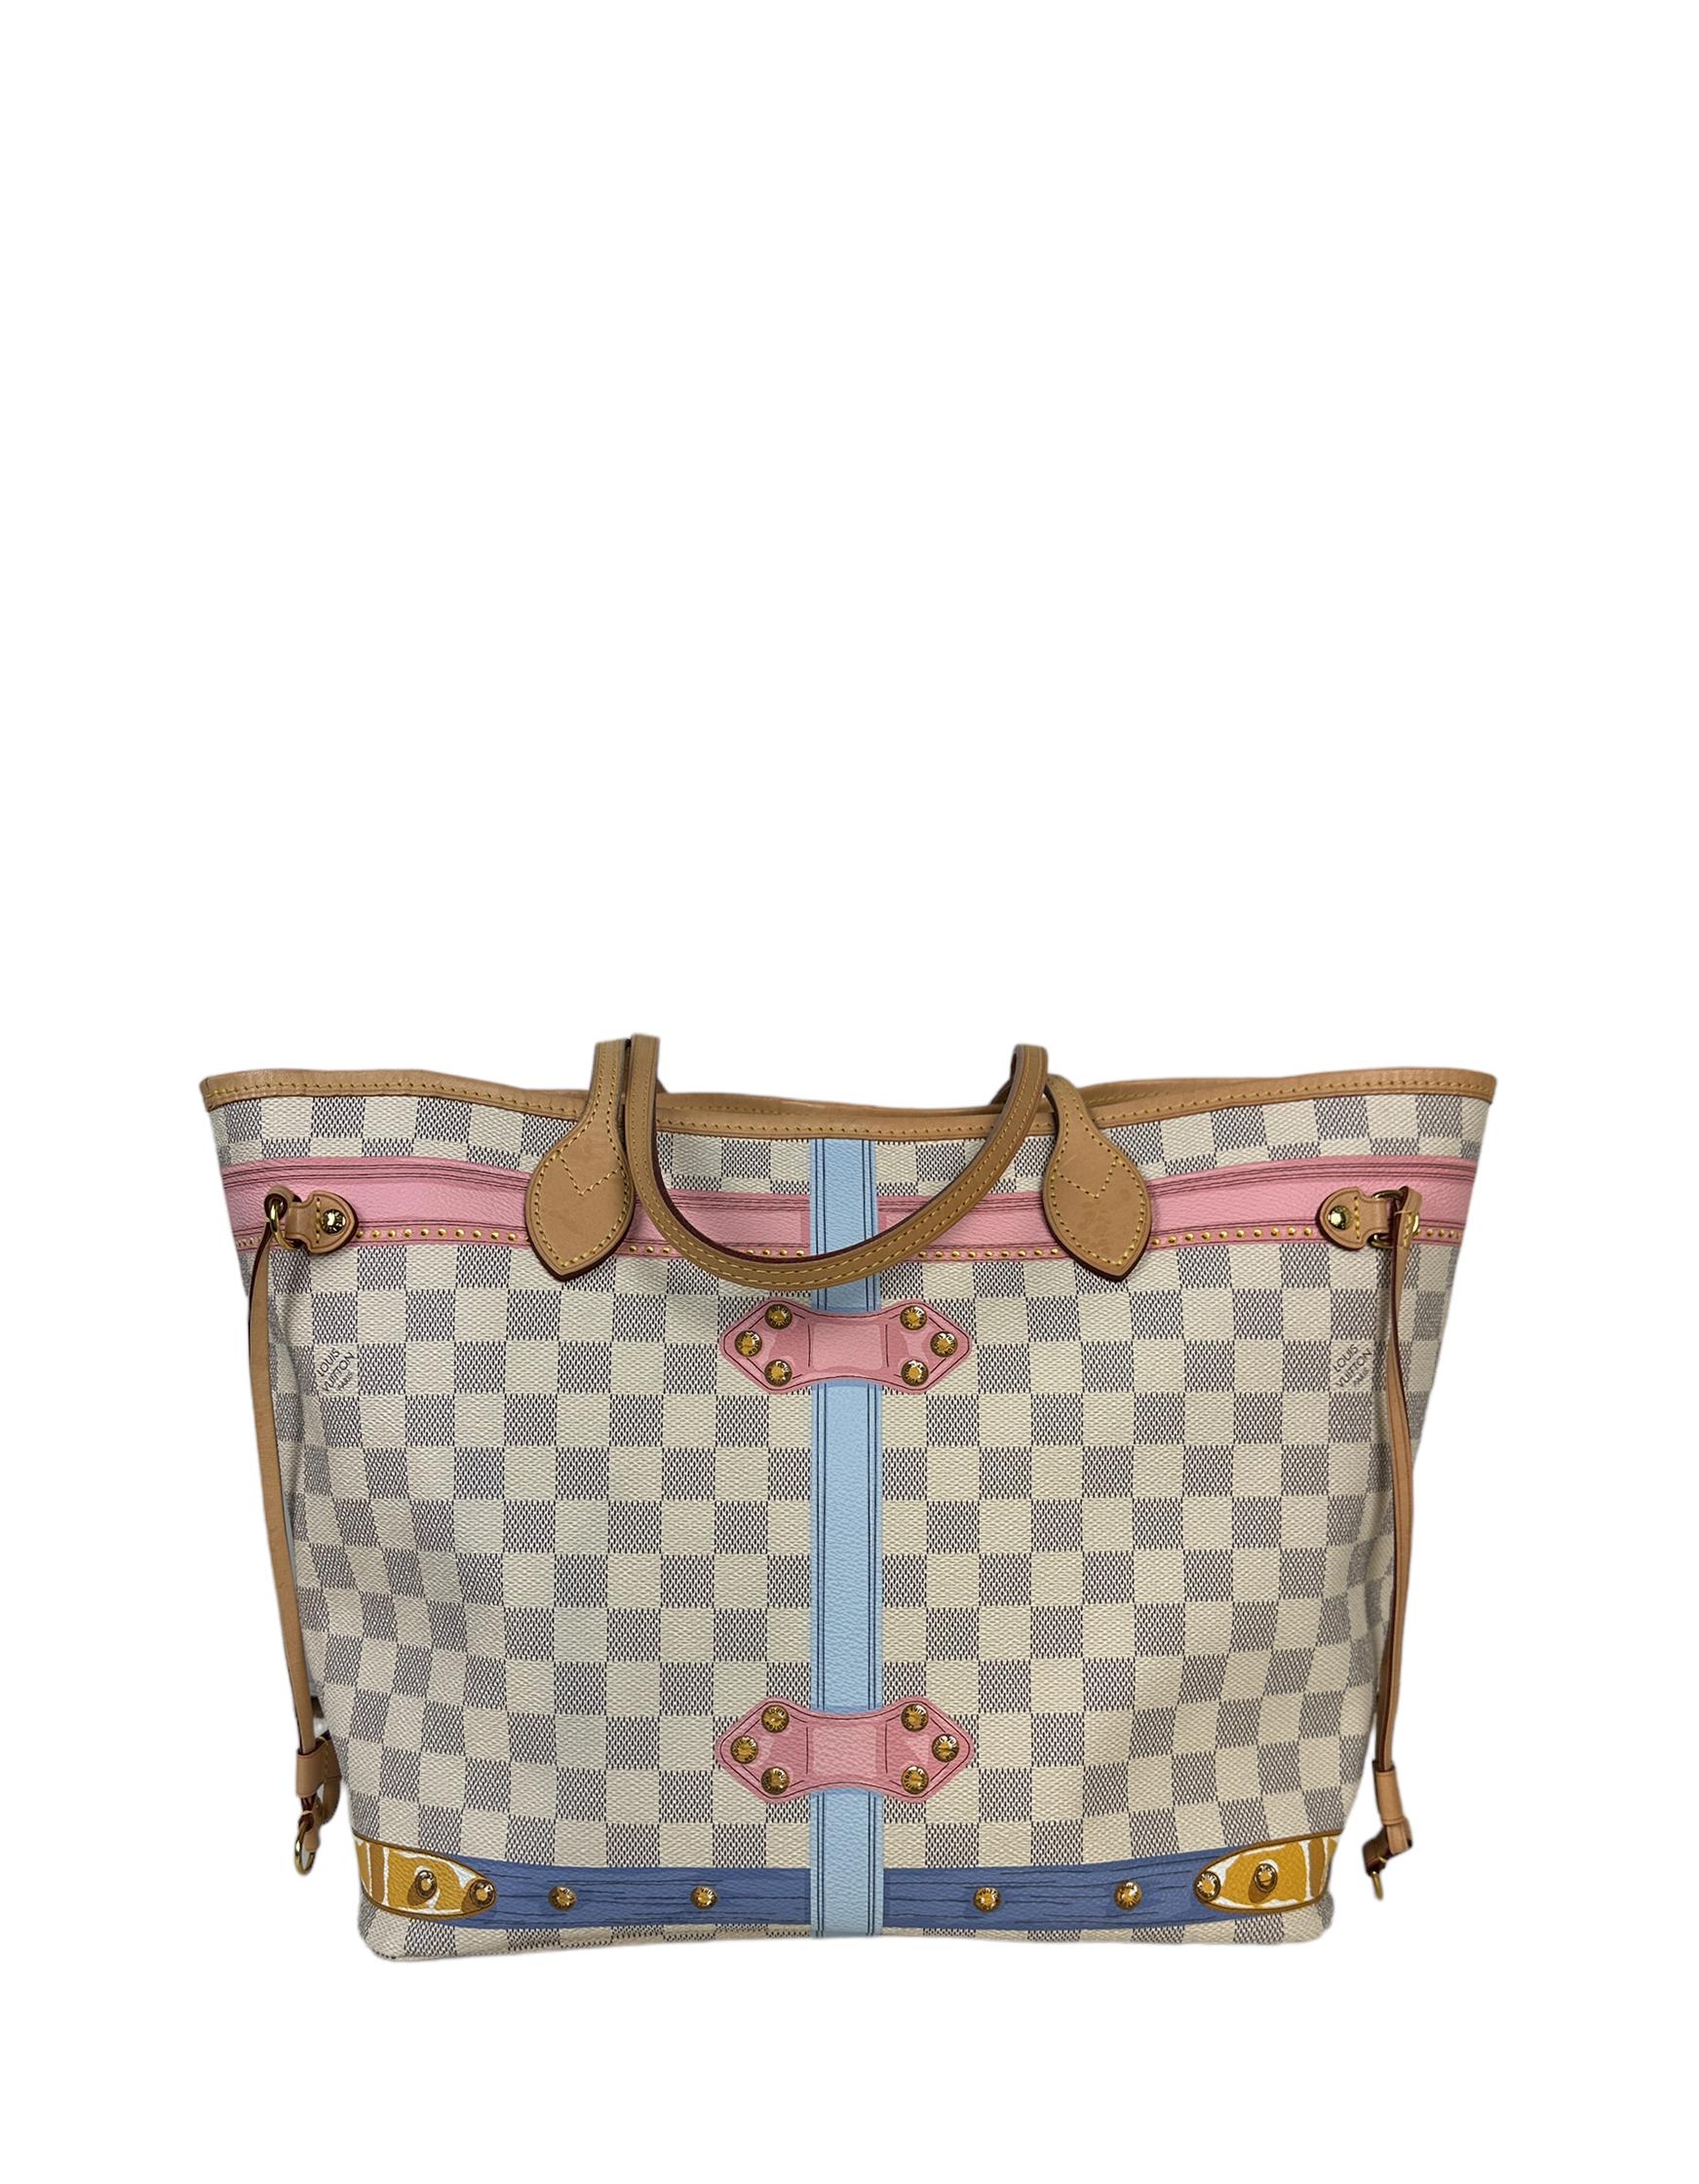 Louis Vuitton Damier Azur Summer Trunks Neverfull MM Tote Bag In Excellent Condition For Sale In New York, NY